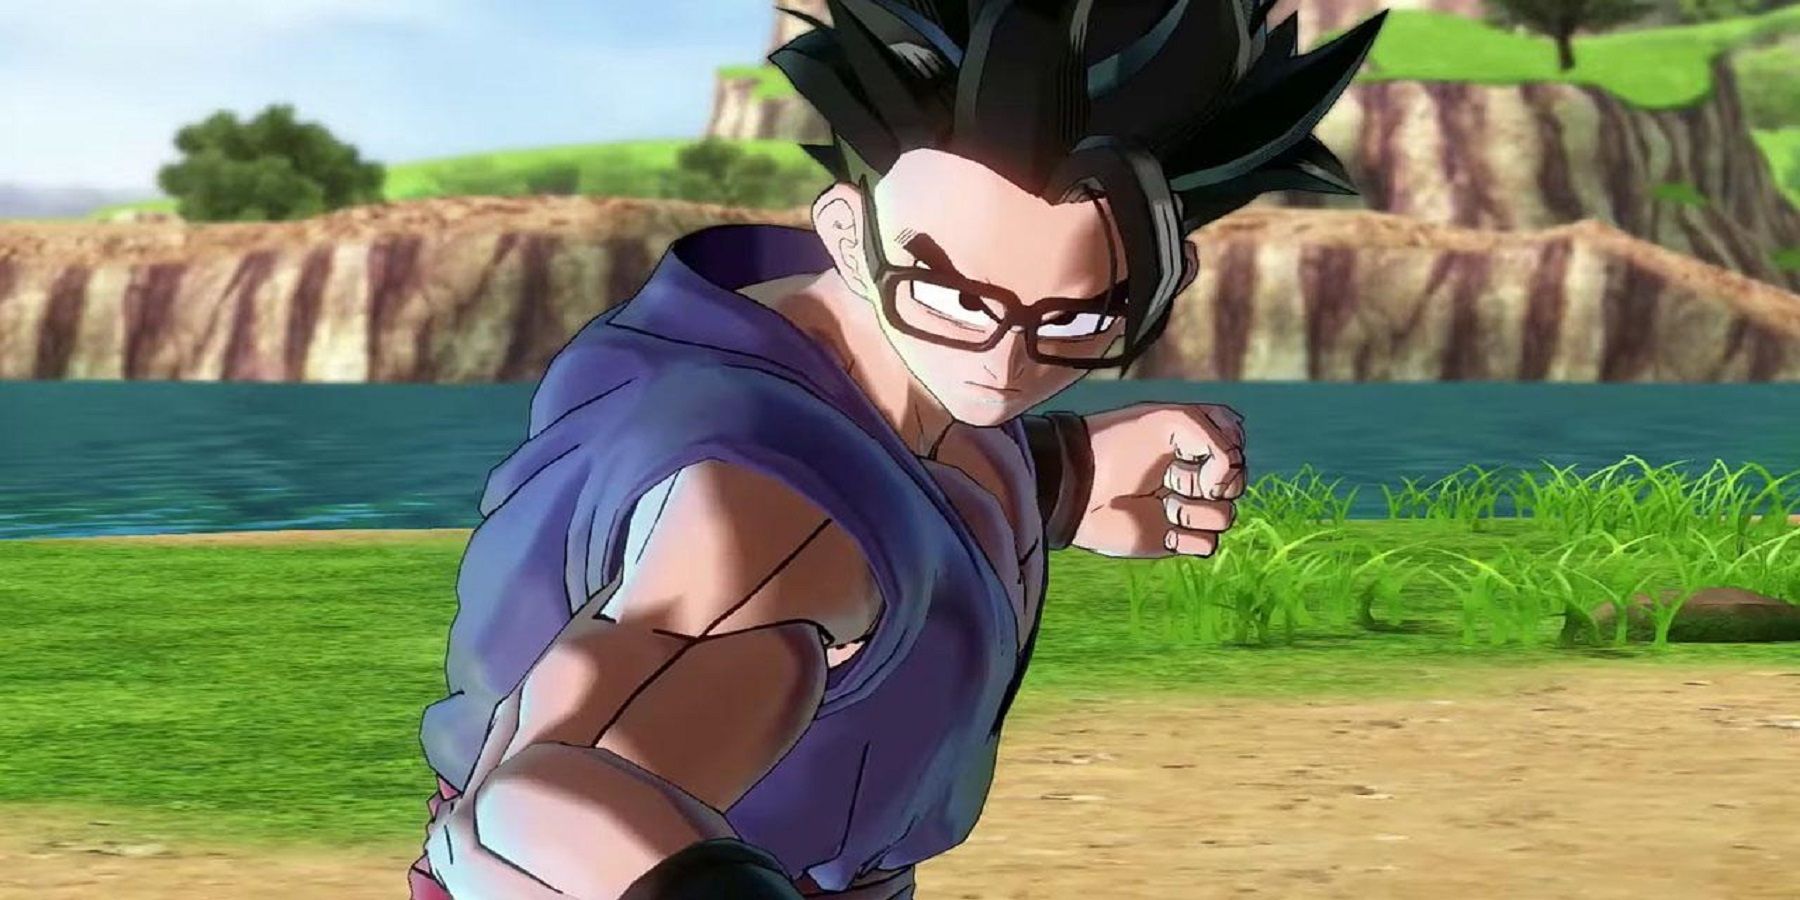 Free Update and Hero of Justice DLC Pack 2 Coming for Dragon Ball